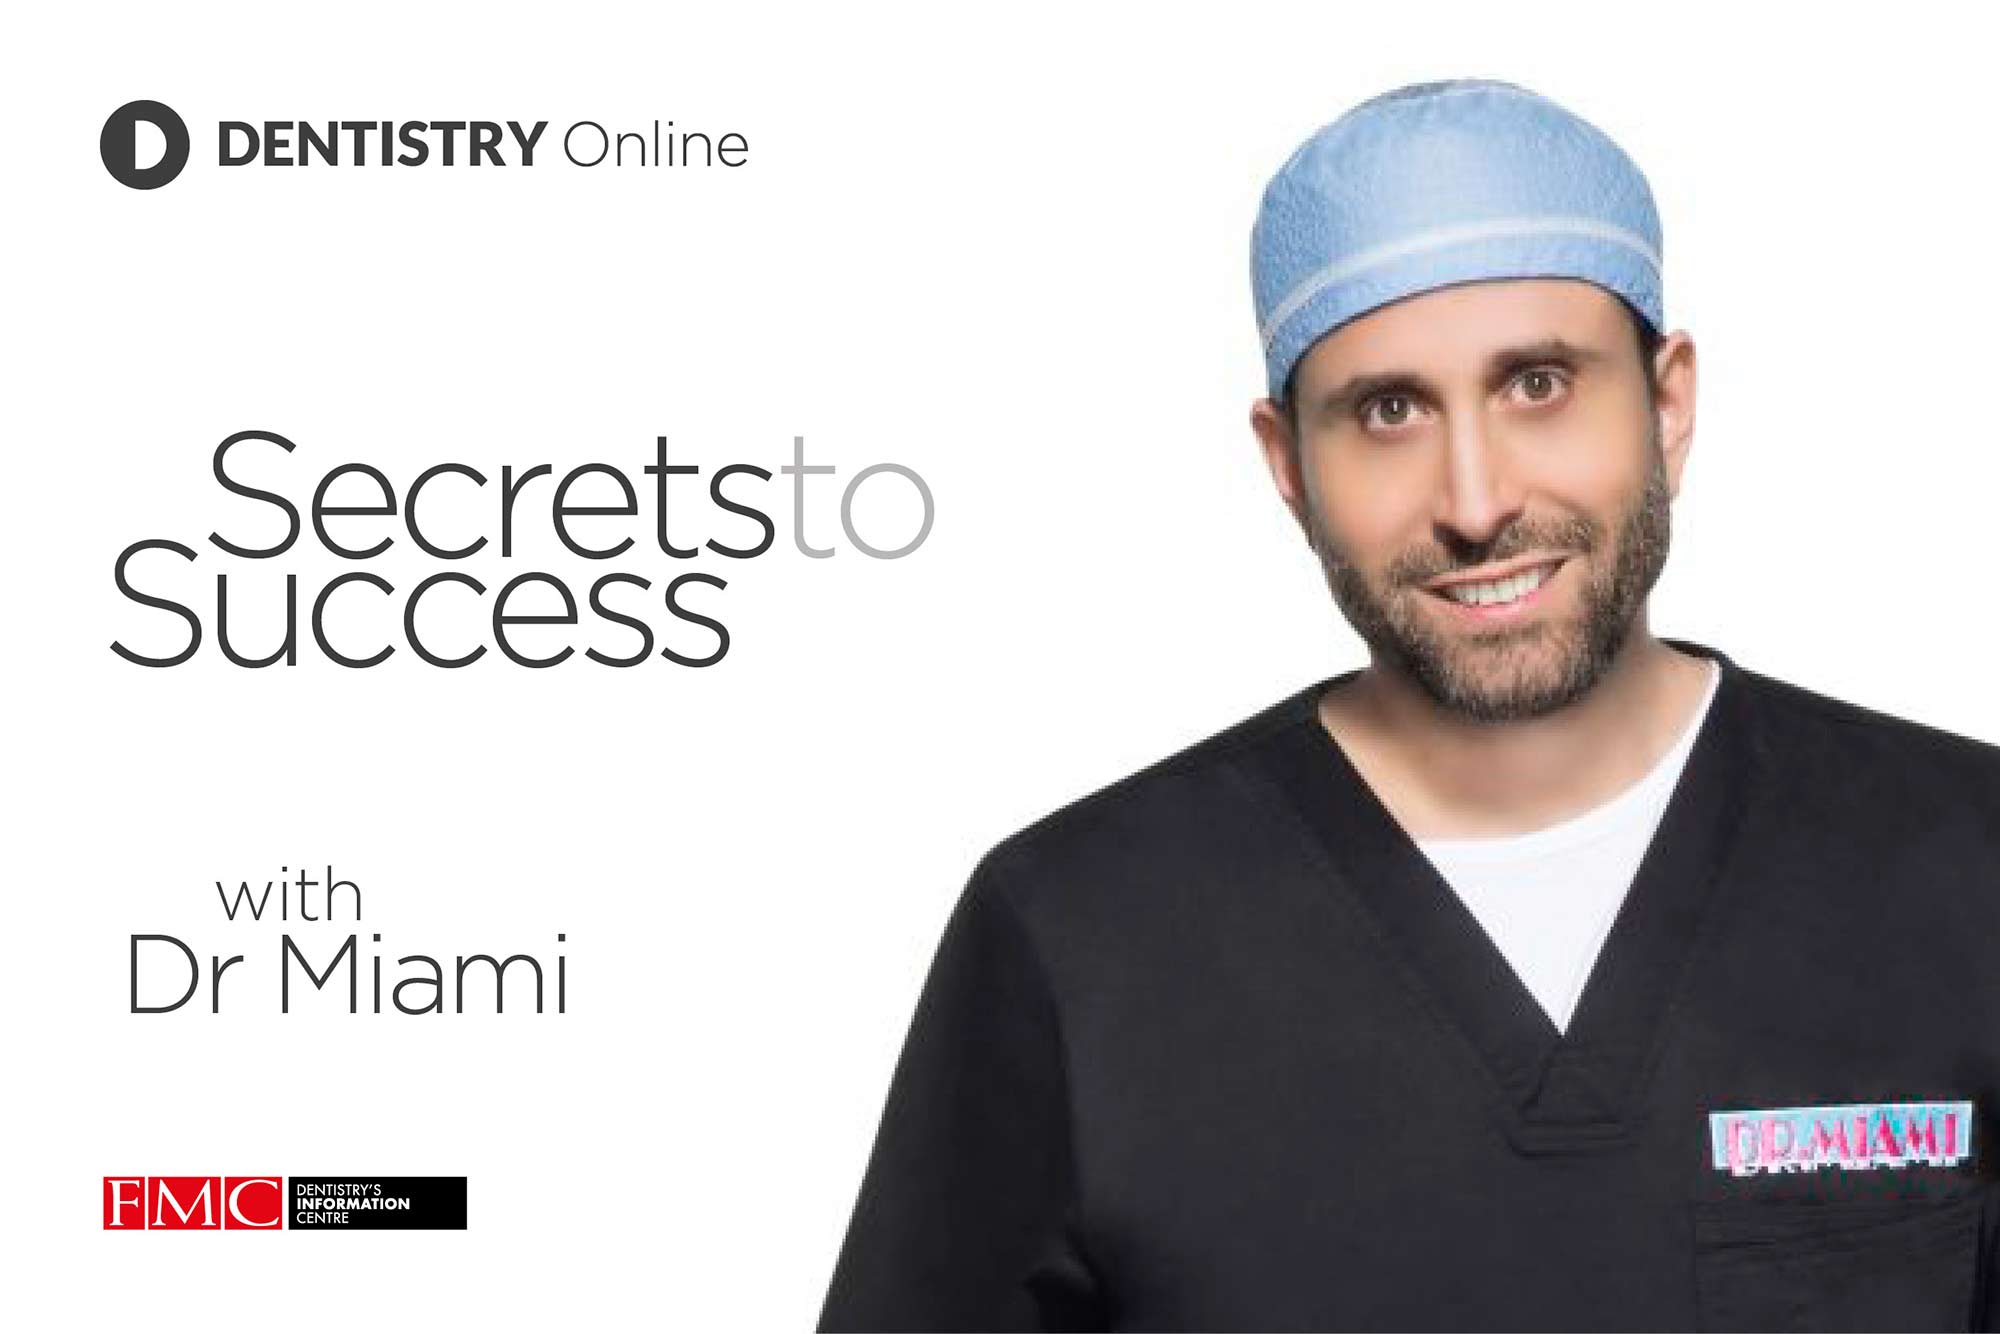 Jana Denzel talks to social media star Dr Miami about his journey into plastic surgery, how he thinks the industry will change post-COVID and what job he would do if he was not a surgeon